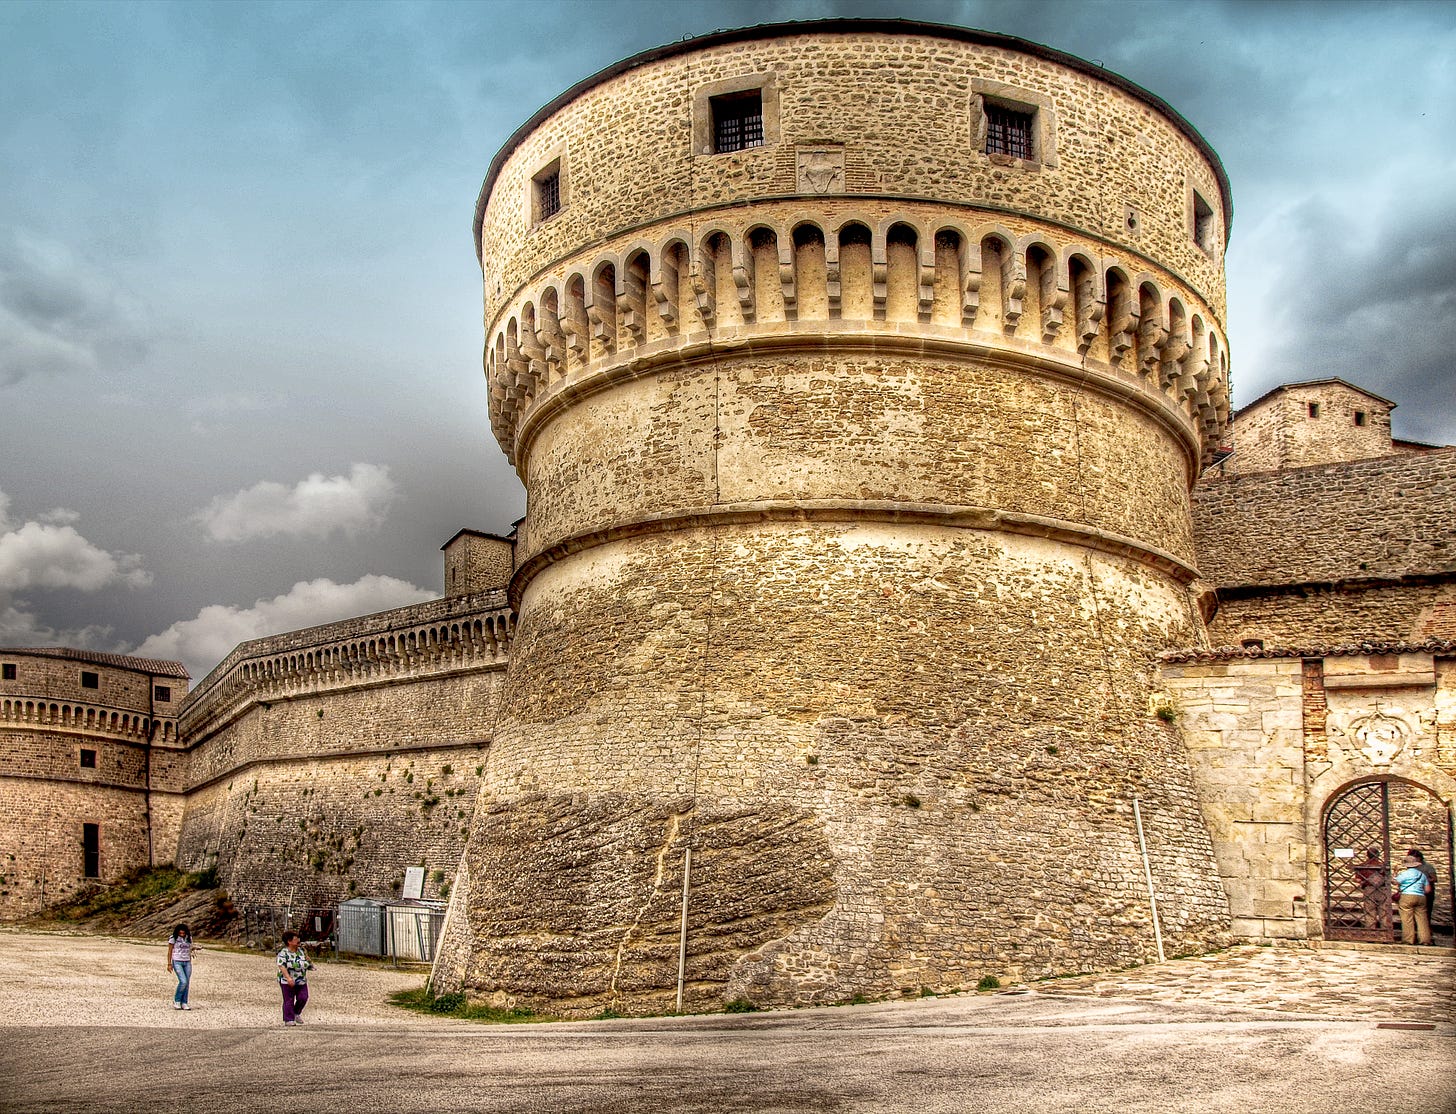 The round tower of the Fortress of San Leo built from stone bricks and natural rock.